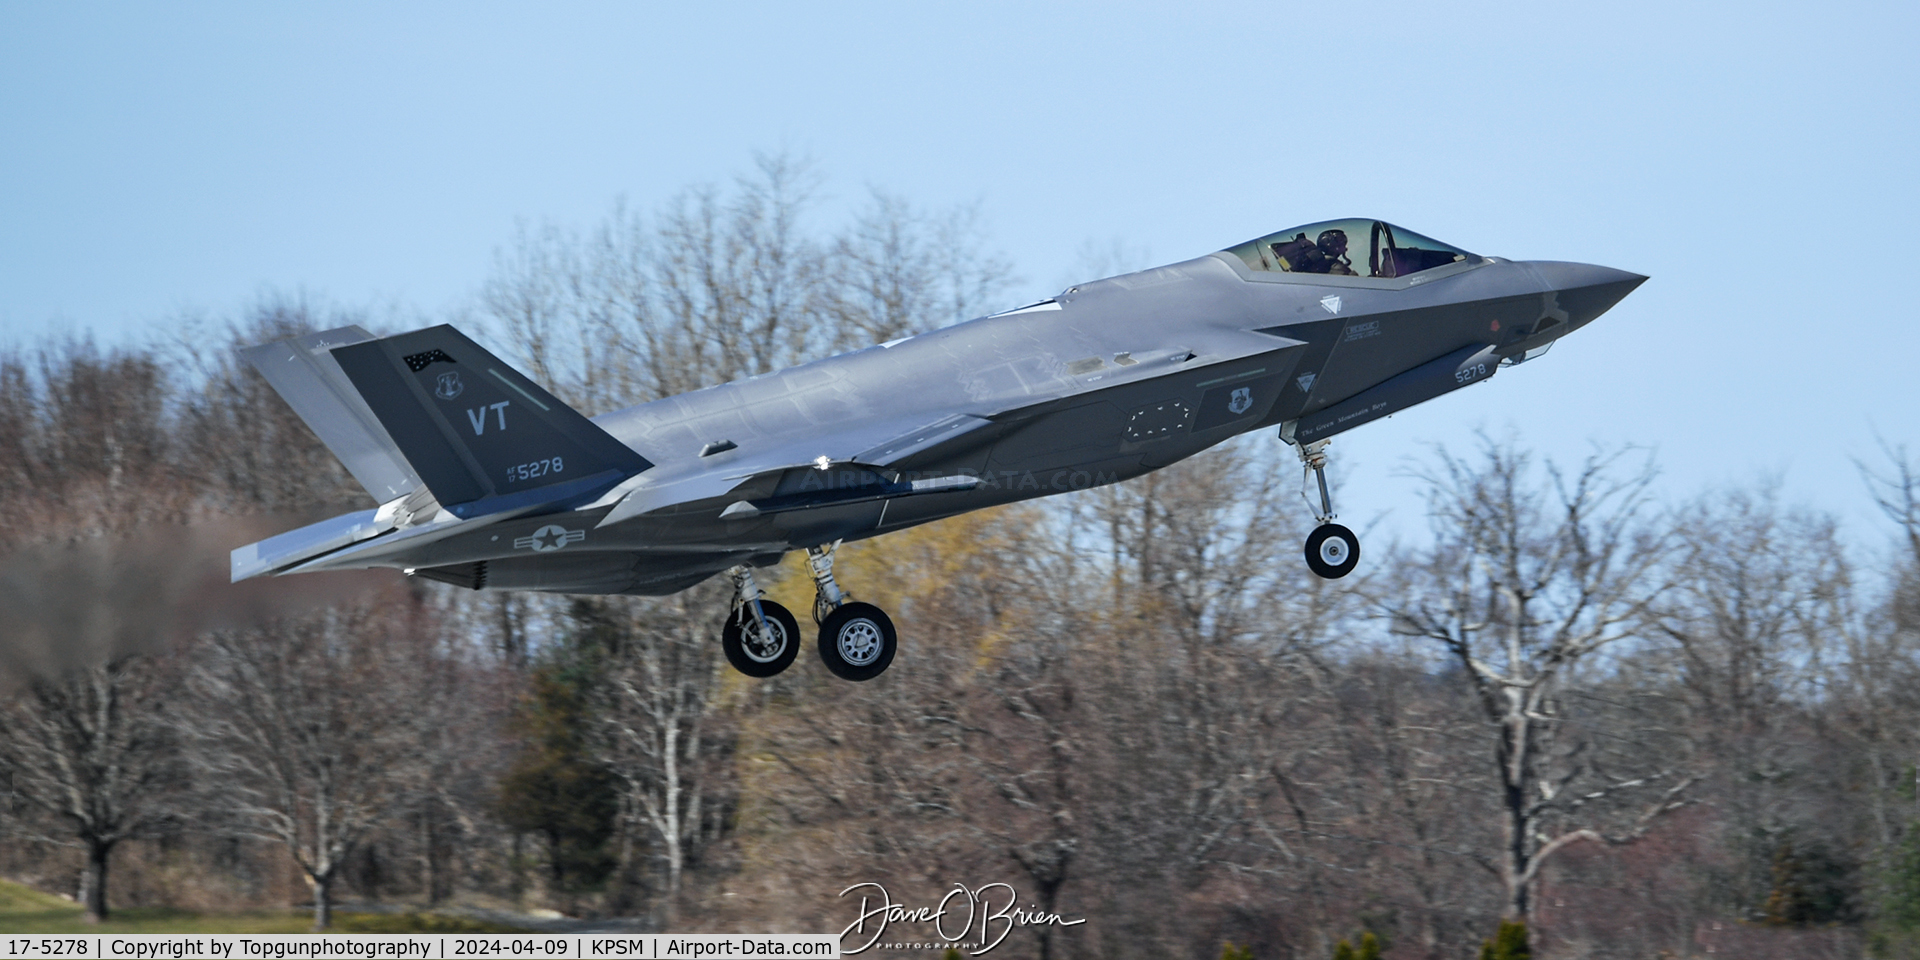 17-5278, 2016 Lockheed Martin F-35A Lightning II C/N AF-220, CASEY11 stops into PSM as a backup plane for the Red Sox flyover